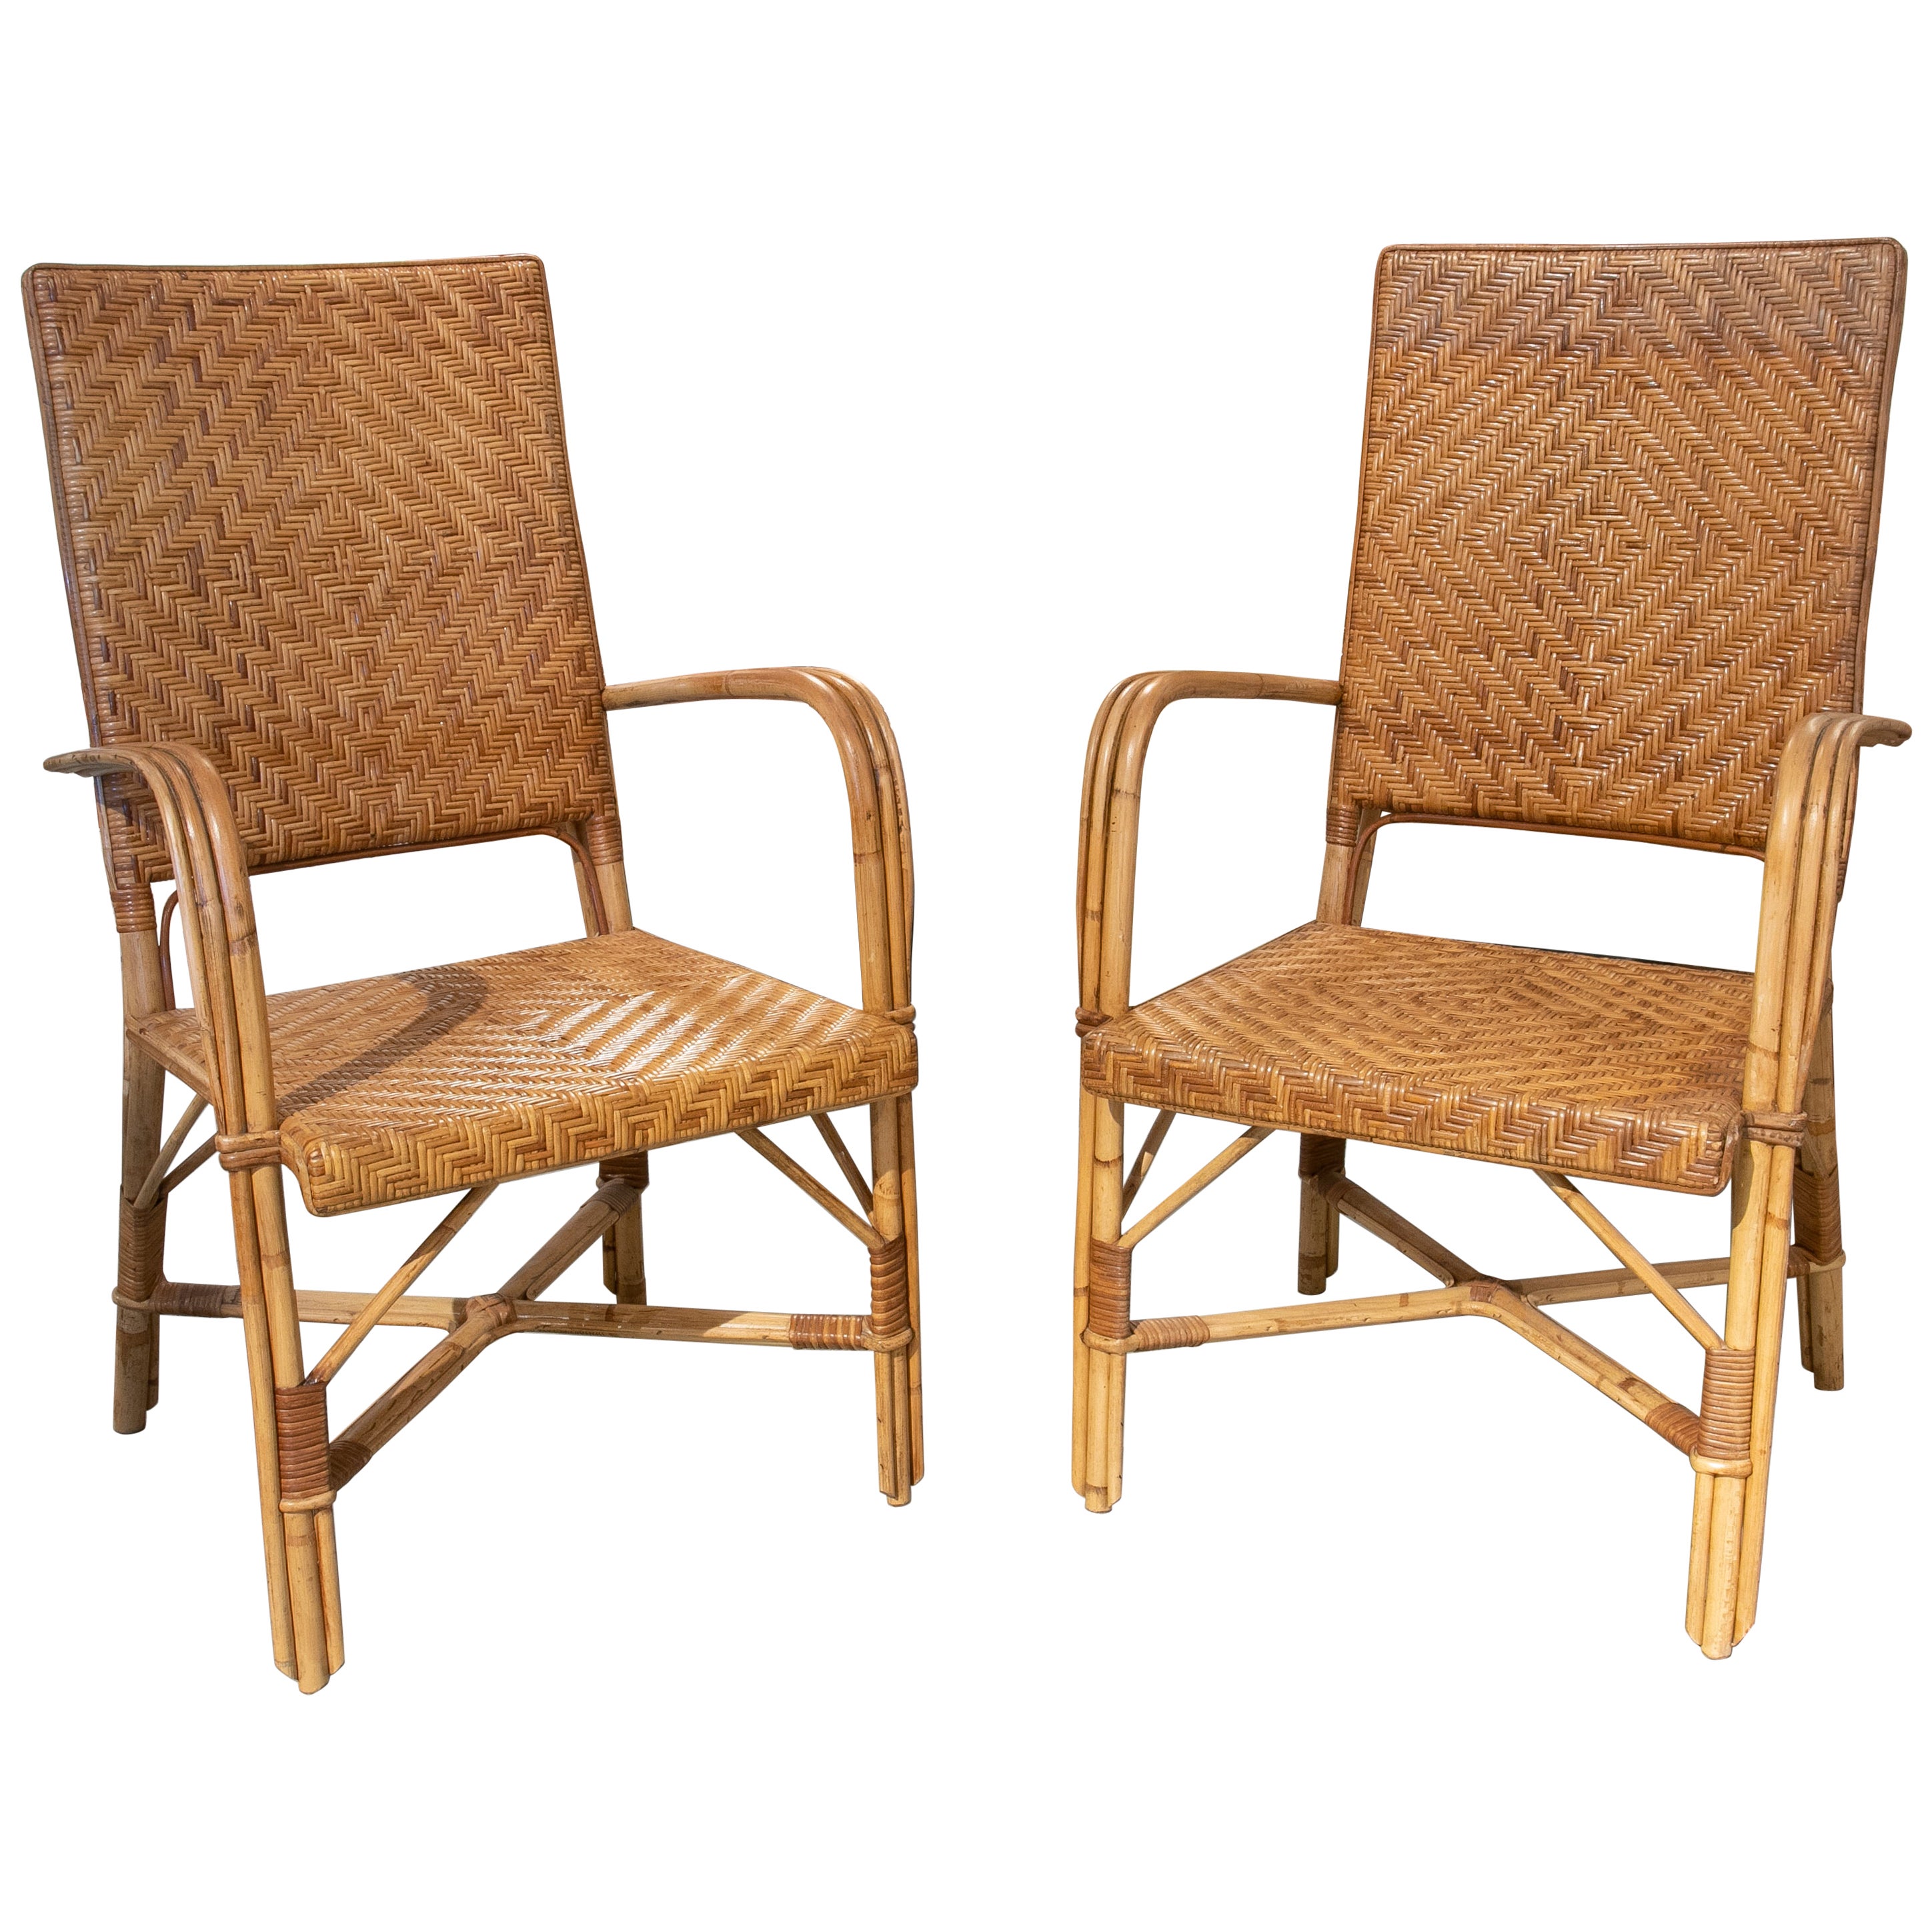 Pair of Handmade Spanish Wicker Armchairs from the 1970ies For Sale